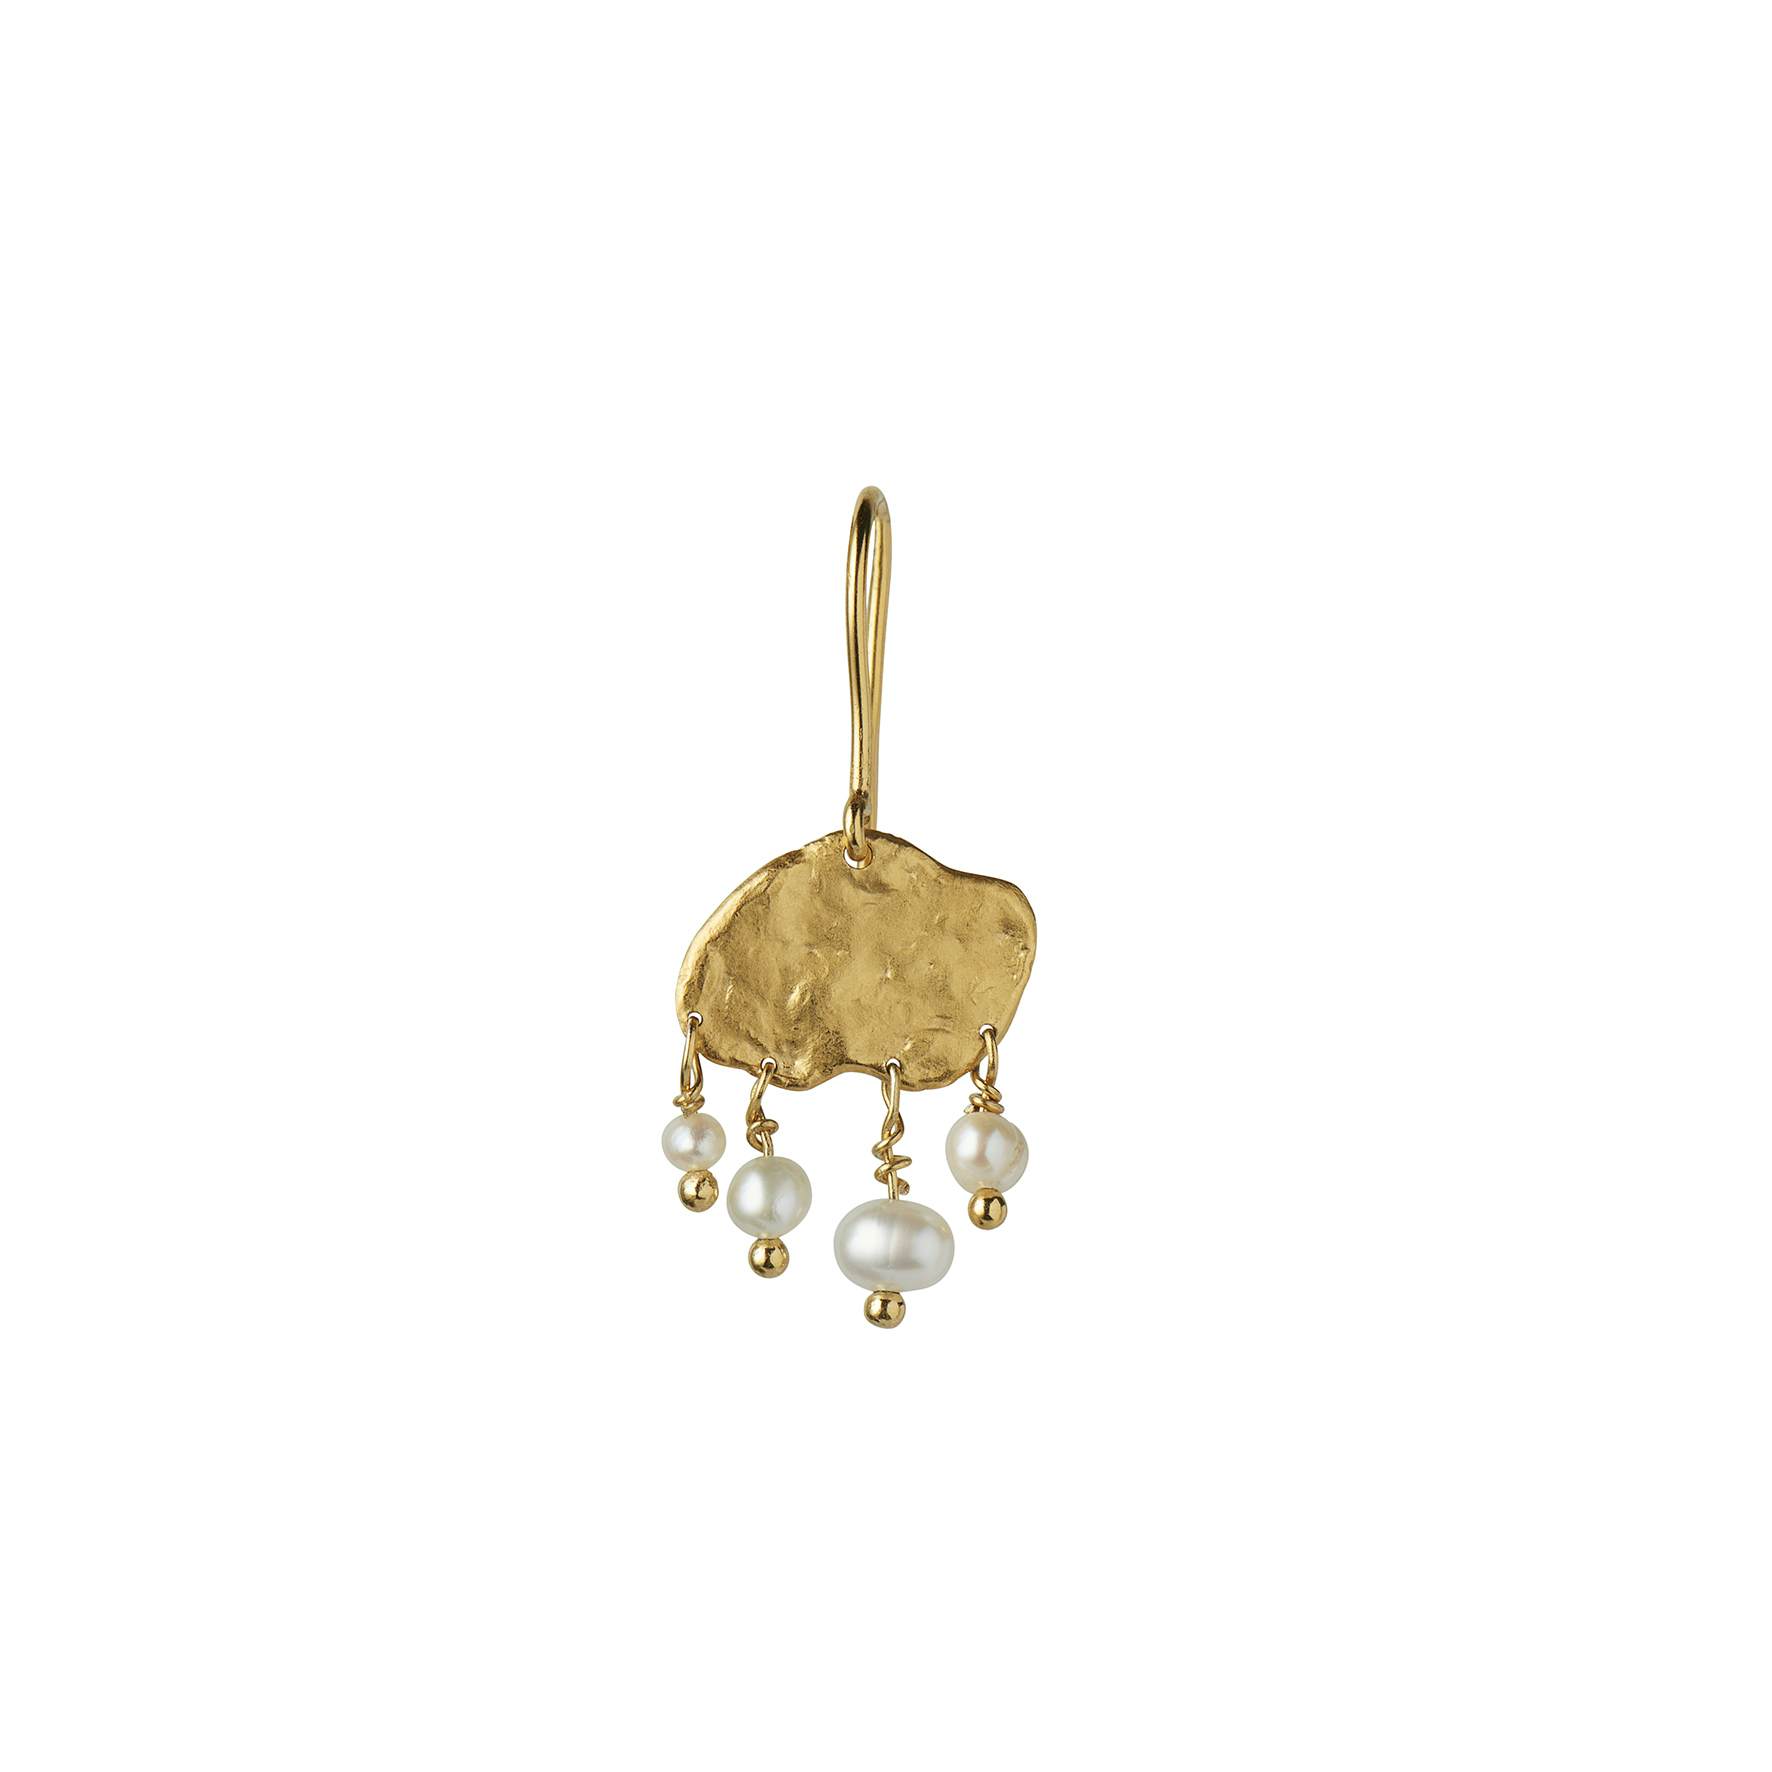 Big Gold Splash Earring – Elegant Pearls from STINE A Jewelry in Goldplated-Silver Sterling 925